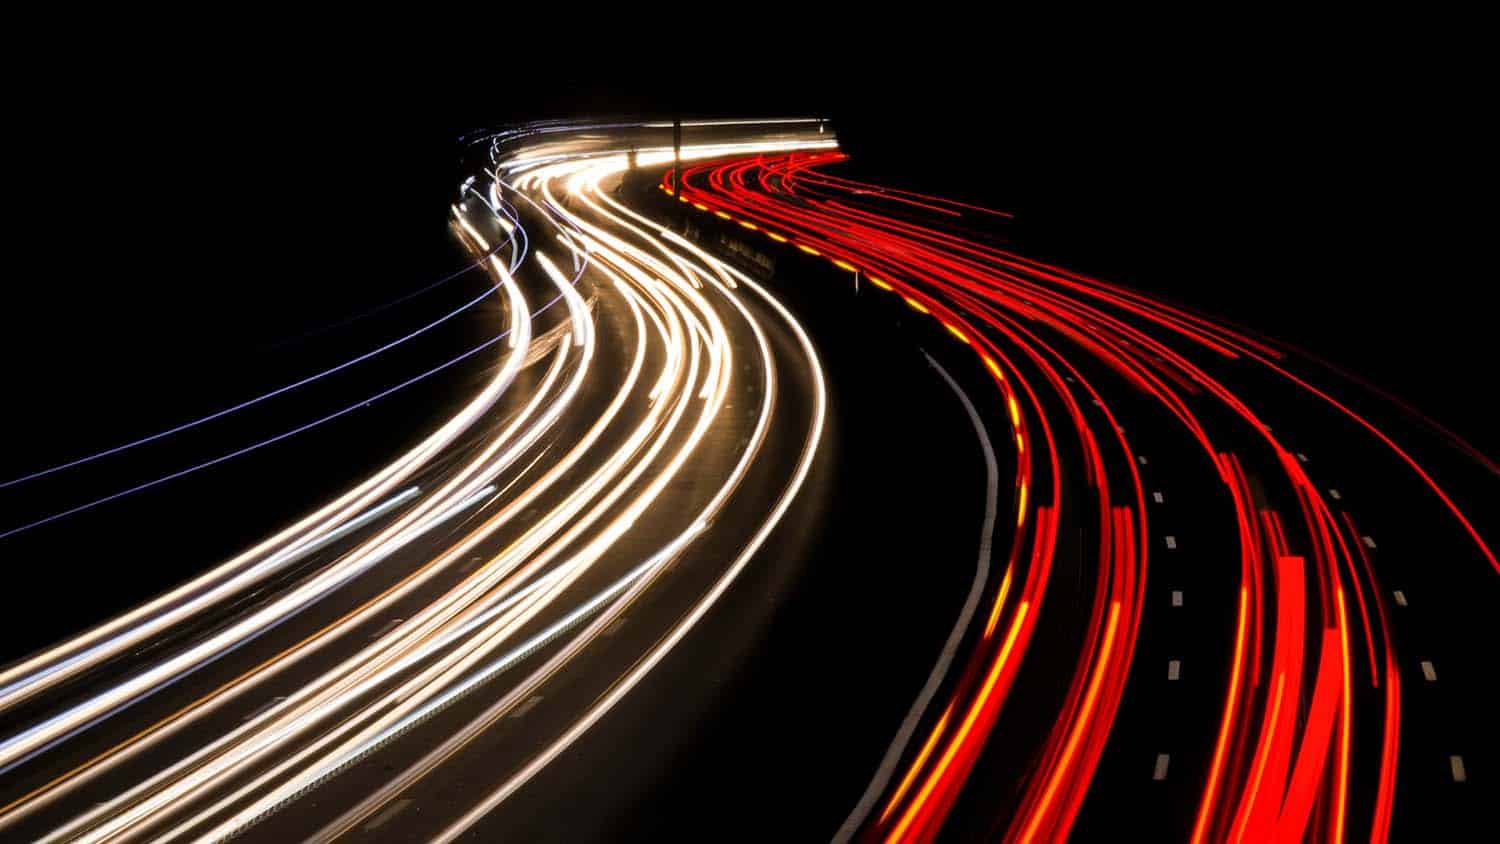 time-lapse photograph shows blurred images of car lights moving in two different directions